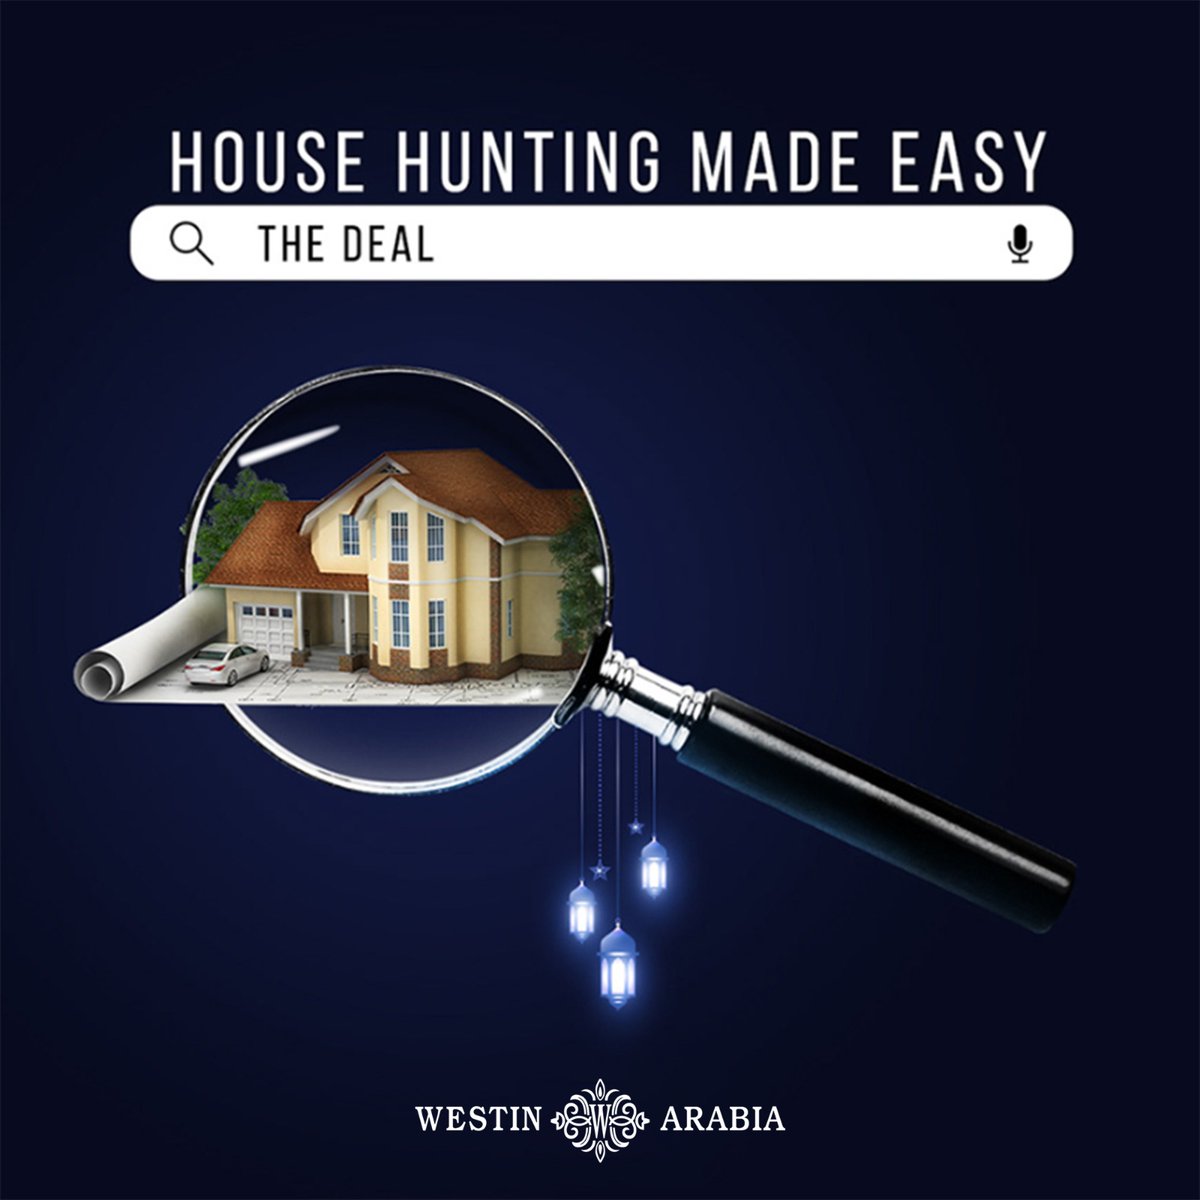 Are you tired of endlessly scrolling through real estate listings with no luck? Let our team at Westin Arabia make house hunting easy for you! With our expertise in the local housing market, we'll help you find your dream home in no time.
#househuntingmadeeasy #realestateexperts